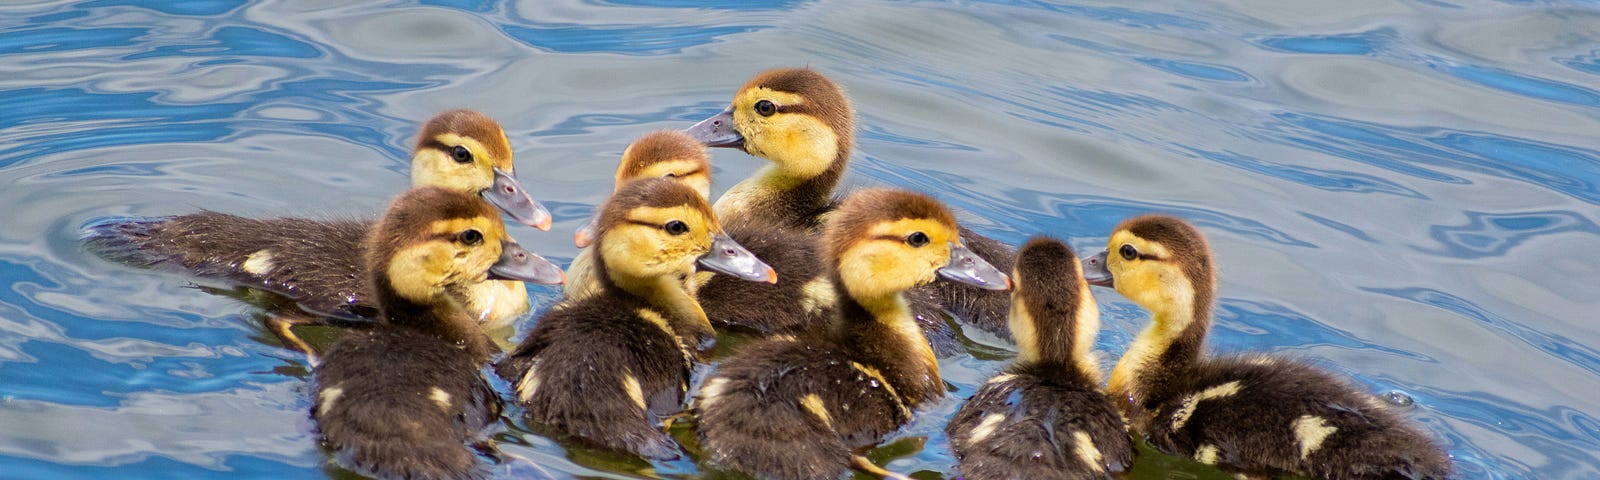 A group of newly hatched ducklings all gathered in a row — eight in total. They are floating fluffy brown and yellow heads with darker back feathers beginning to grow in.